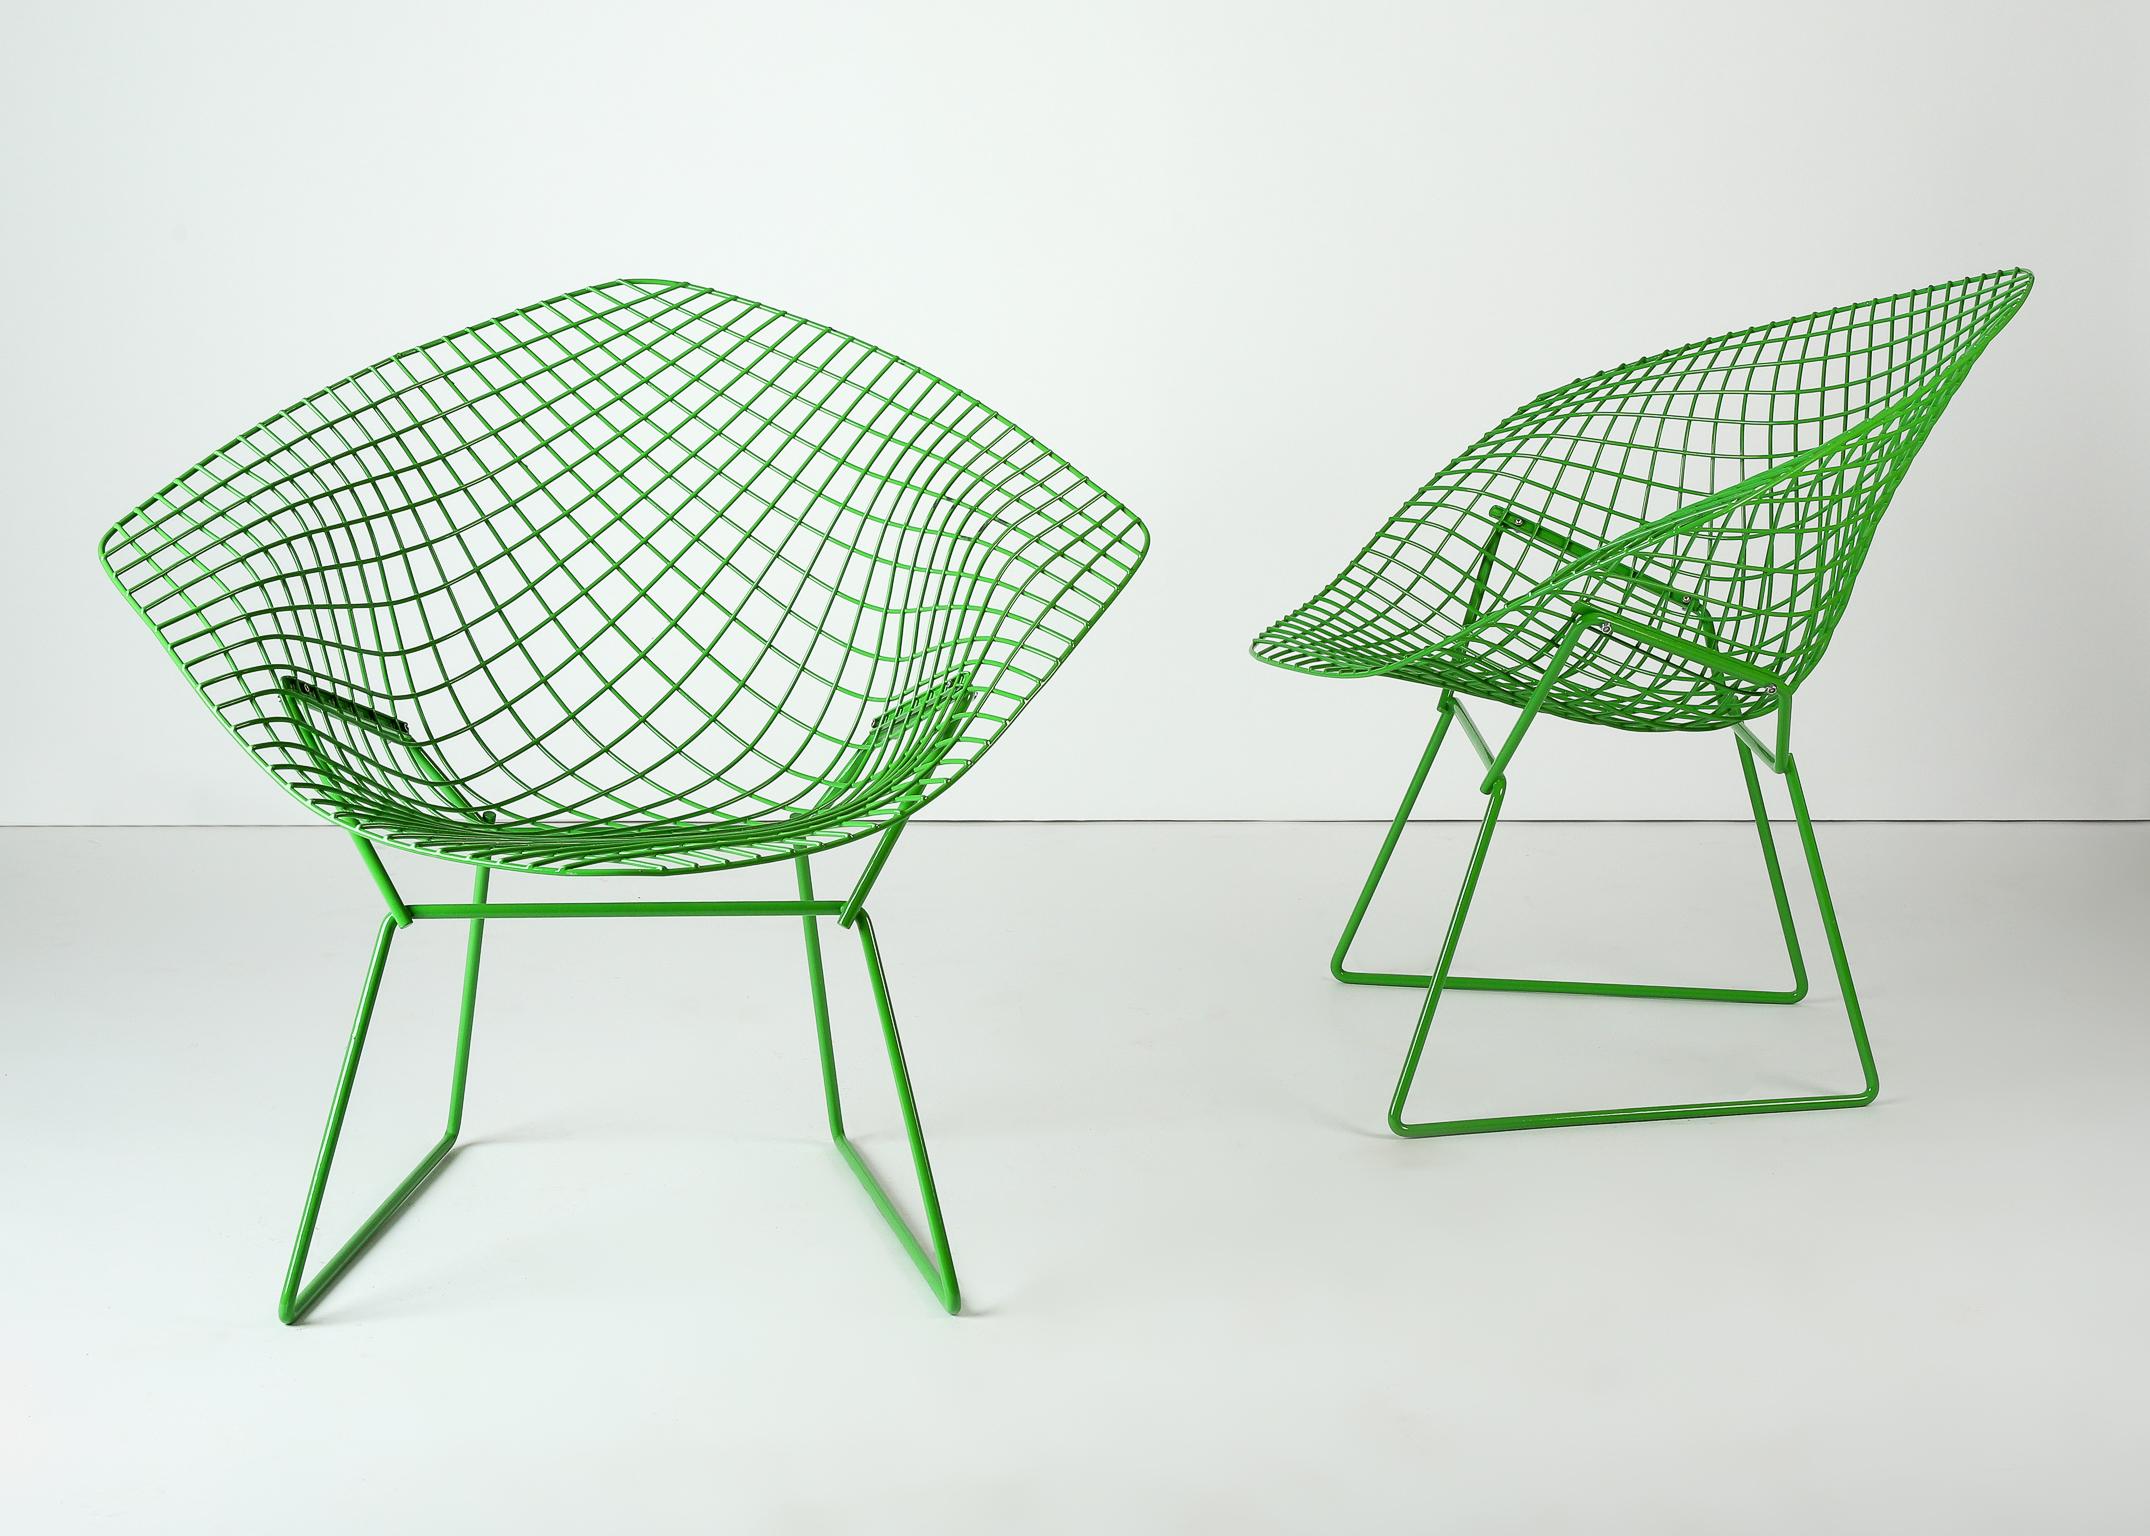 Pair of Harry Bertioa for Knoll diamond chairs recently restored and powder coated in a lively apple g green .